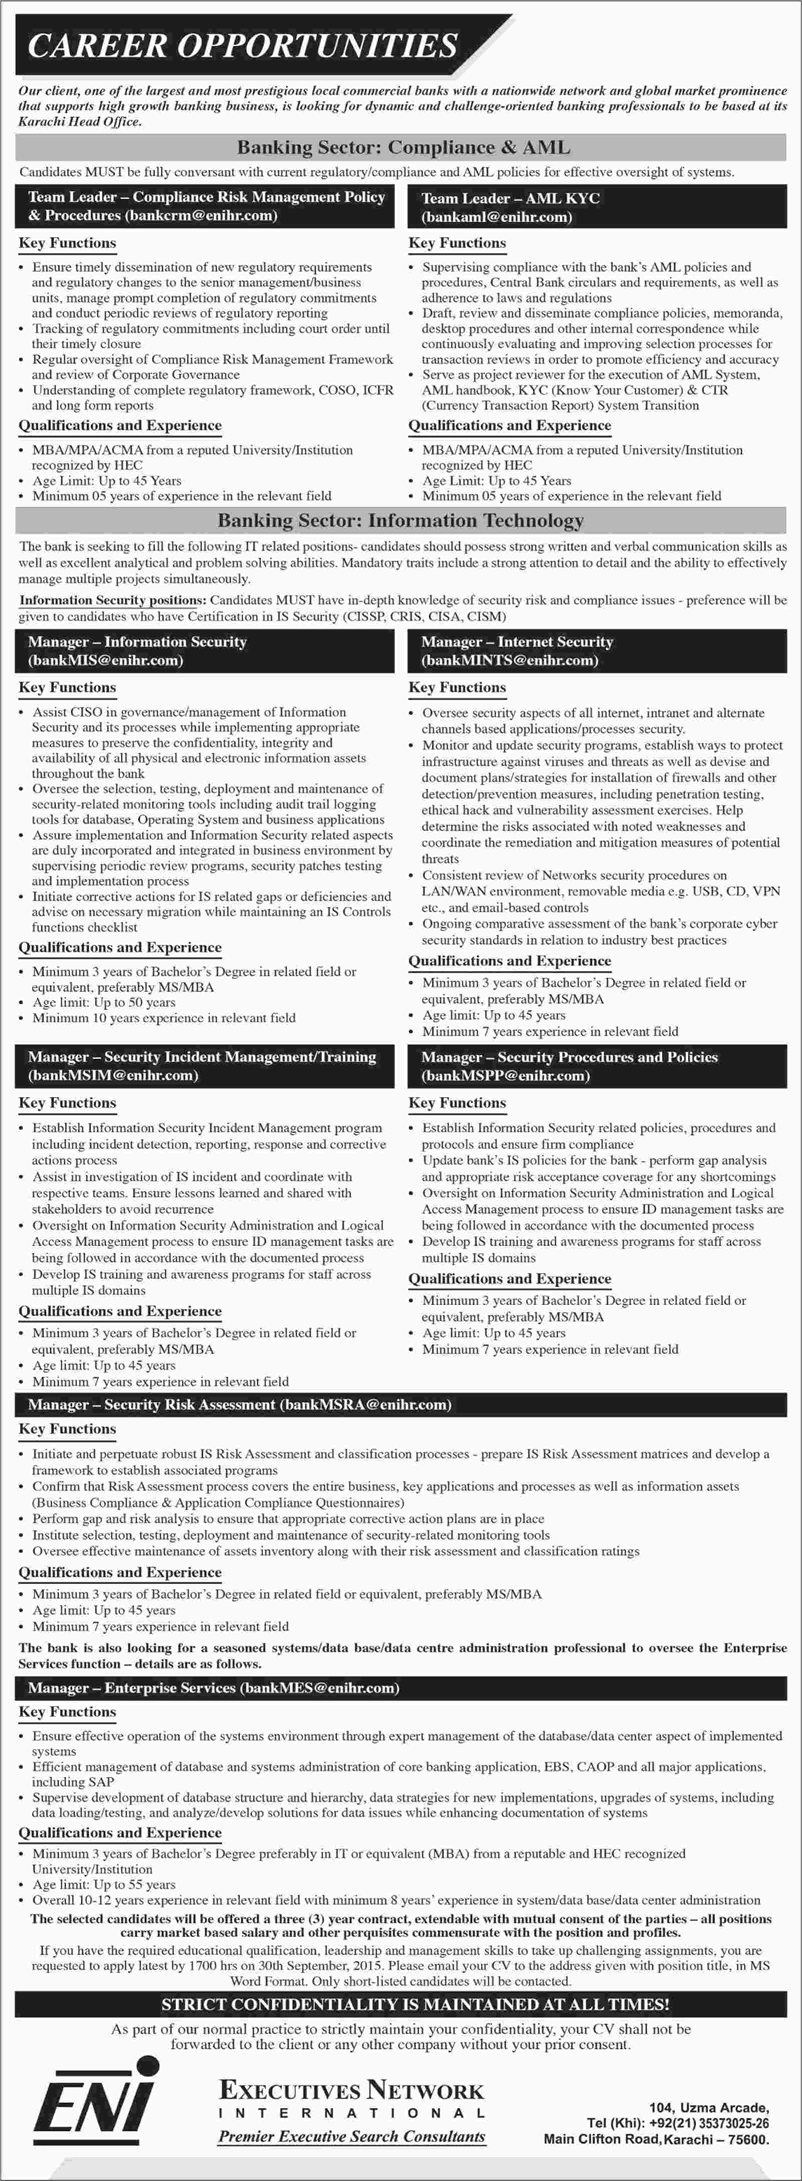 Executive Network International Jobs 2015 August / September Team Leader & Managers for Banking Sector